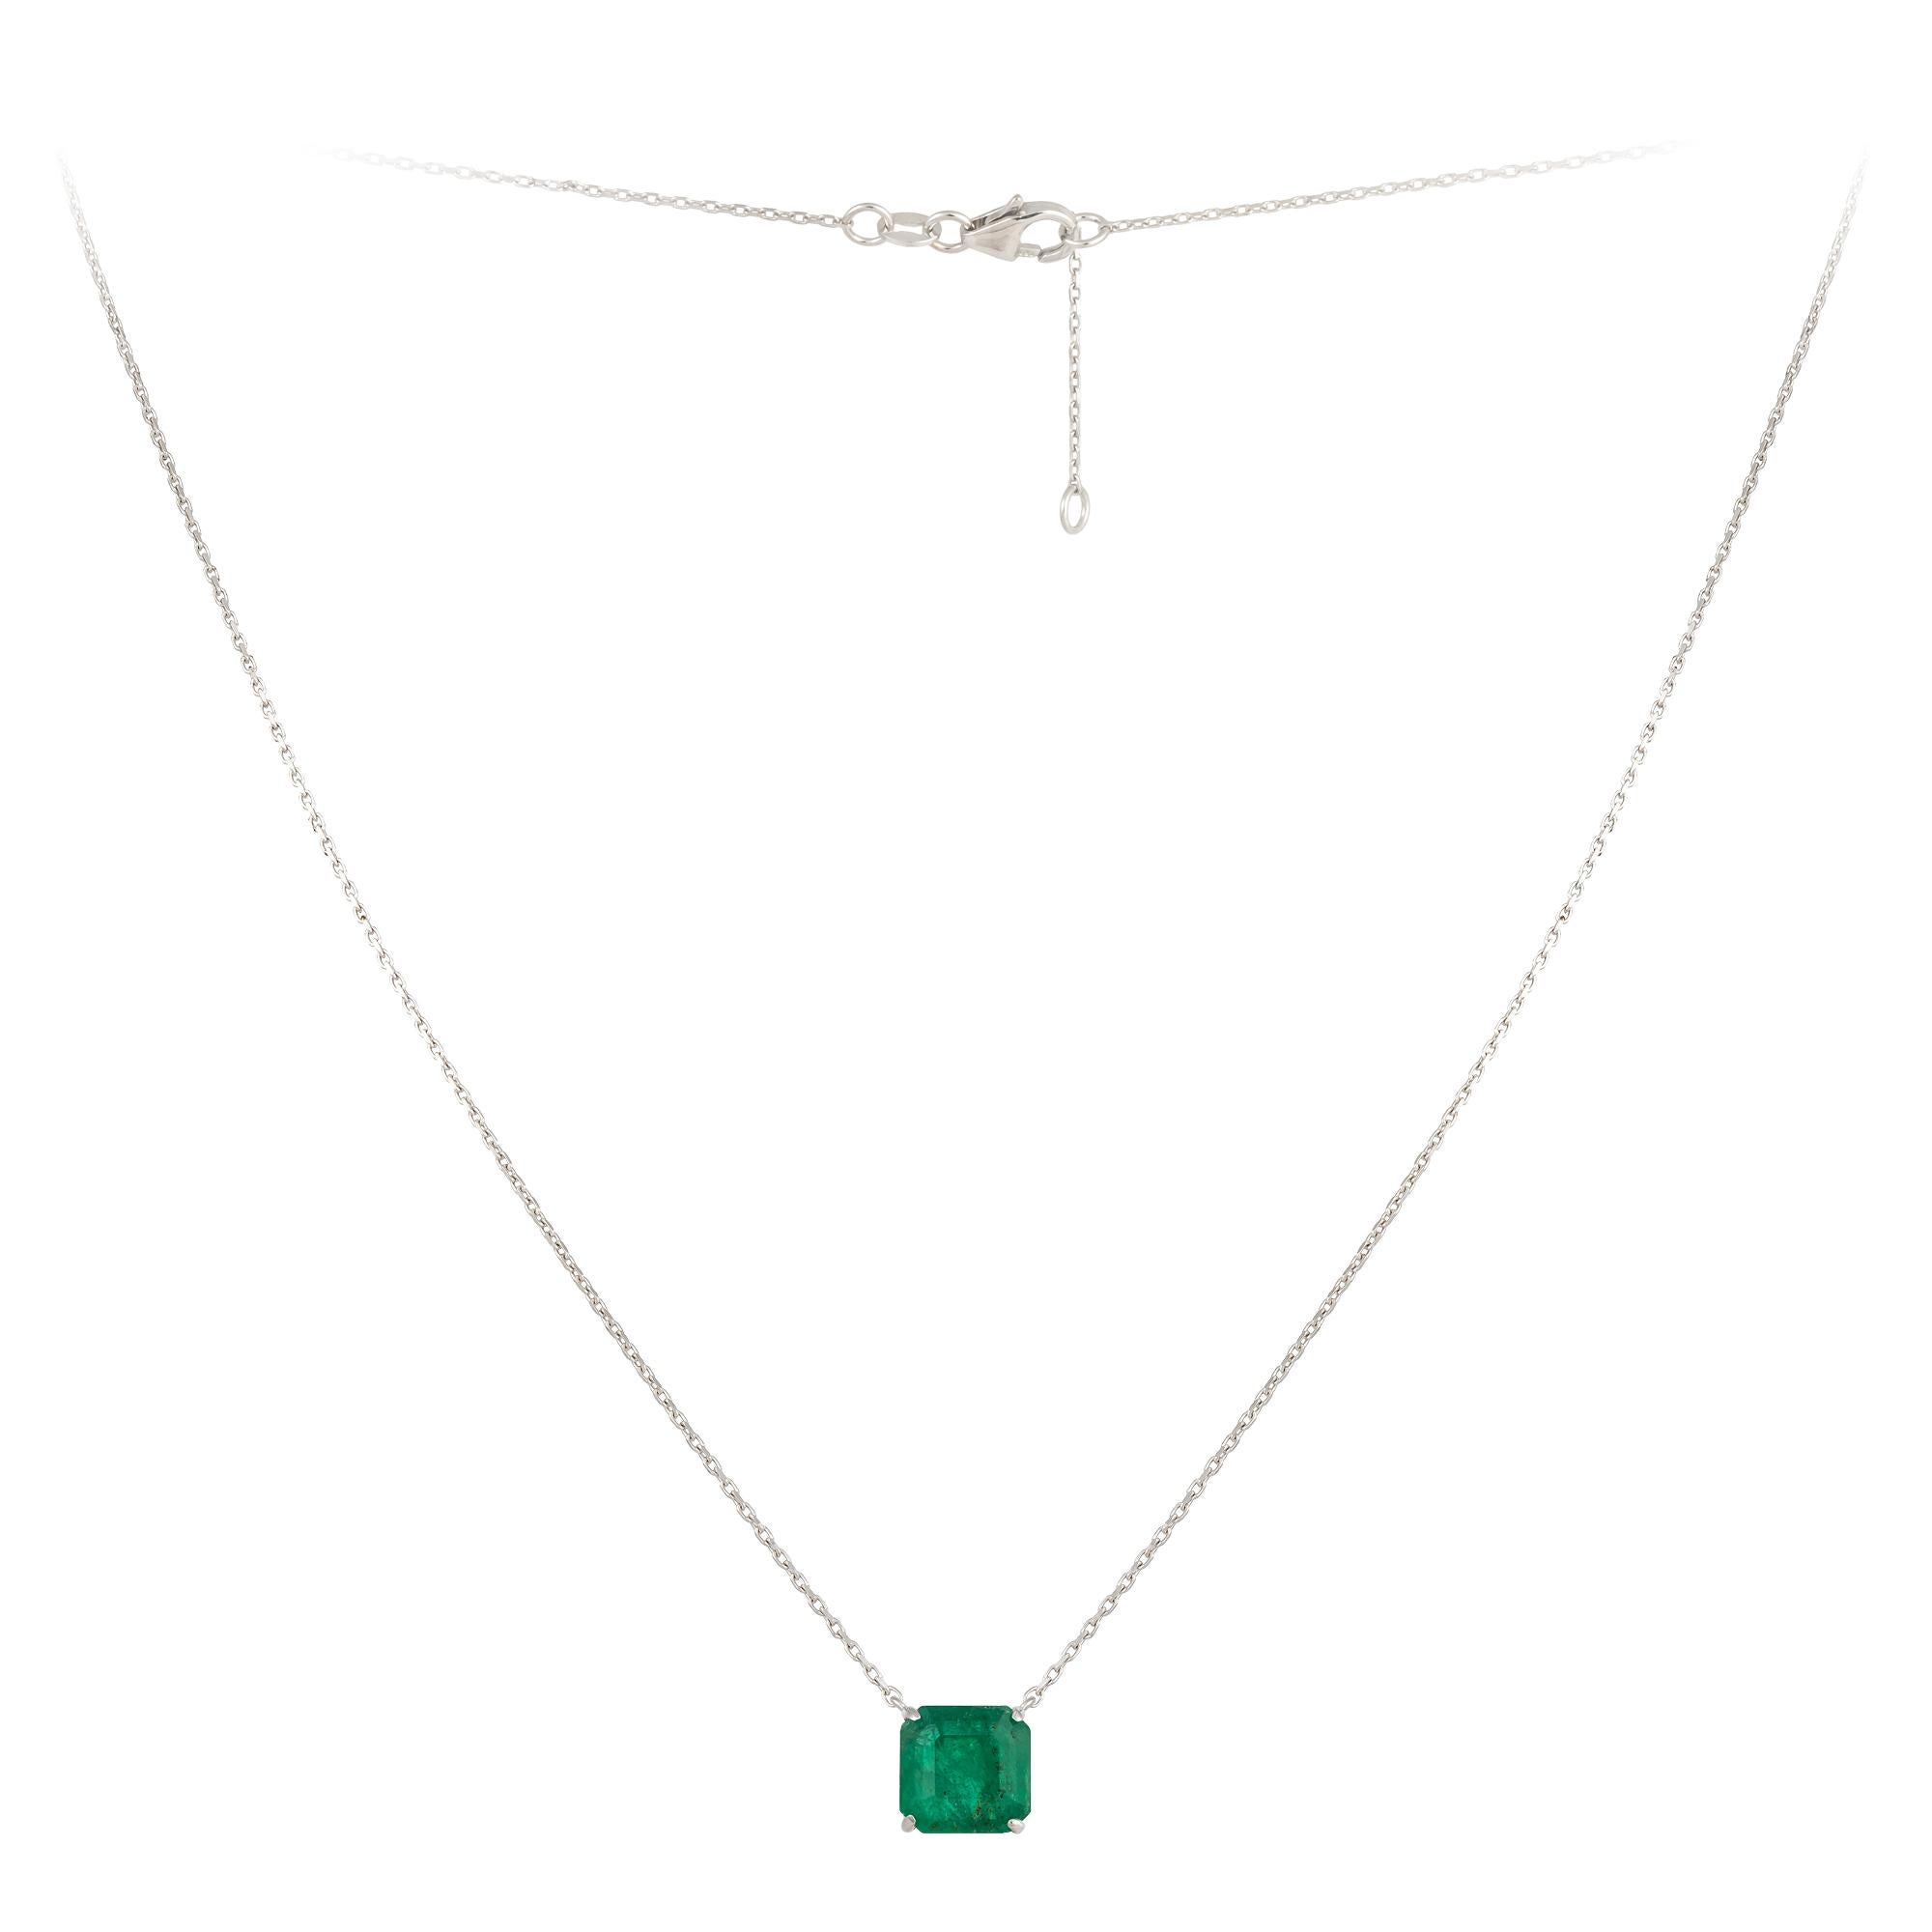 Modern Every Day White Gold 18K Necklace Emerald Diamond For Her For Sale